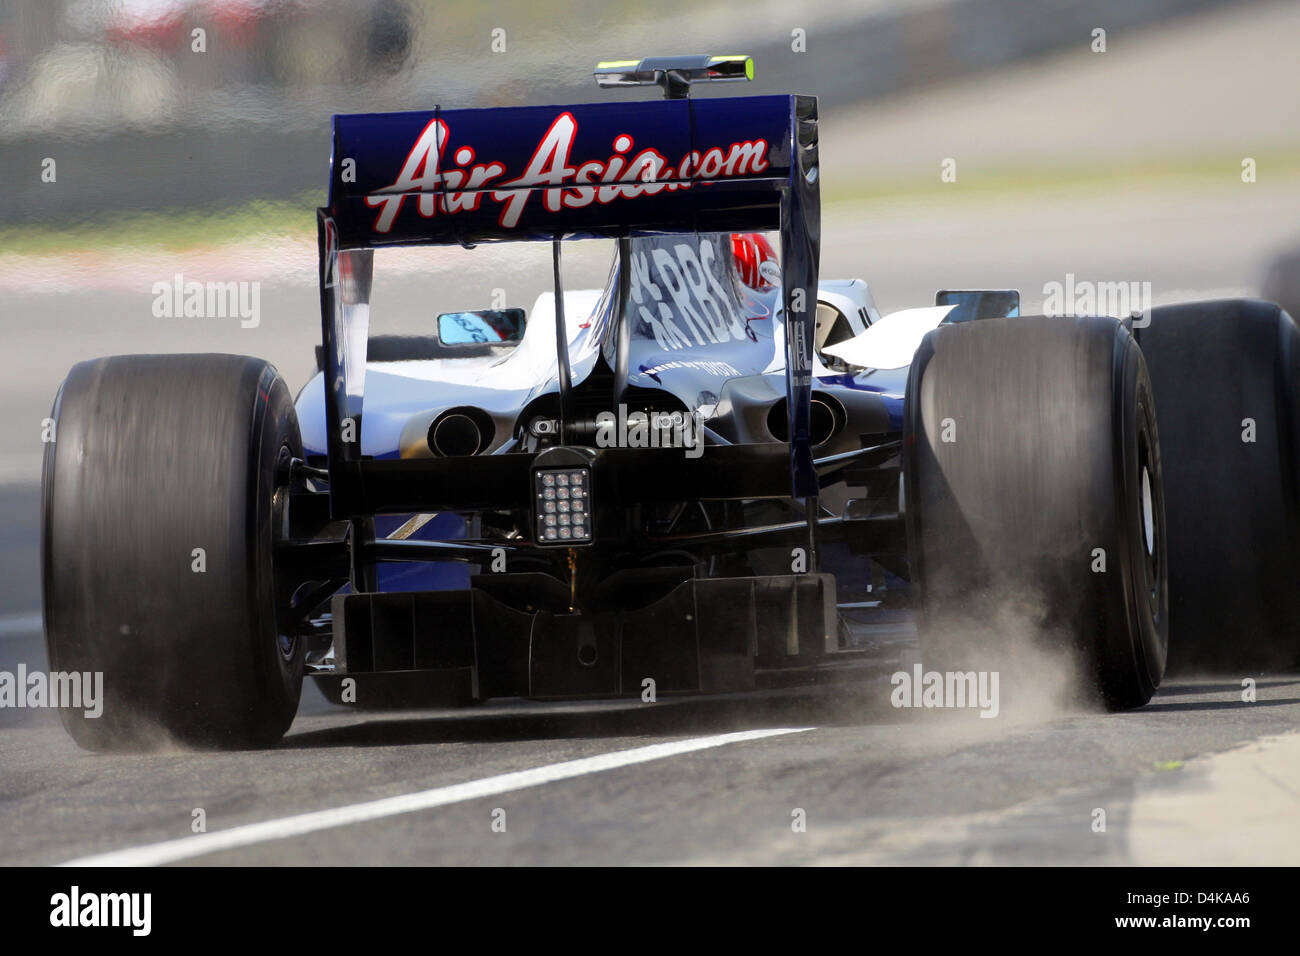 Japanese Formula One driver Kazuki Nakajima of Williams F1 steers his car during the first training session at Shanghai International Circuit, 17 April 2009. The Chinese Formula One Grand Prix will take place in Shanghai on 19 April 2009. Photo: Jens Buettner Stock Photo